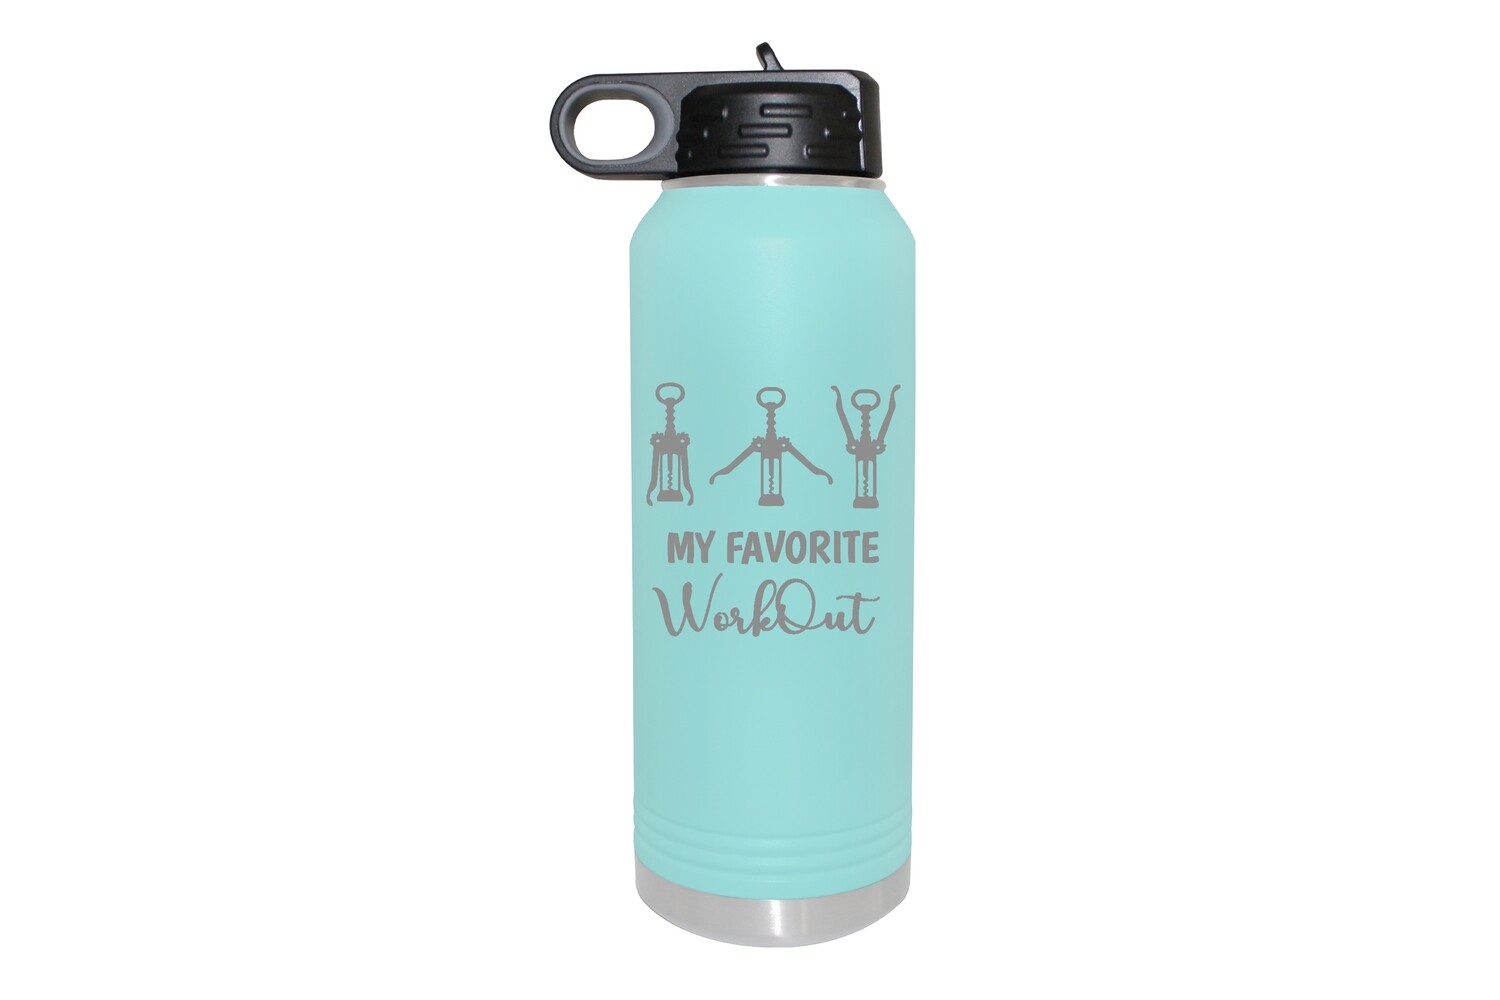 My Favorite Workout Insulated Water Bottle 32 oz